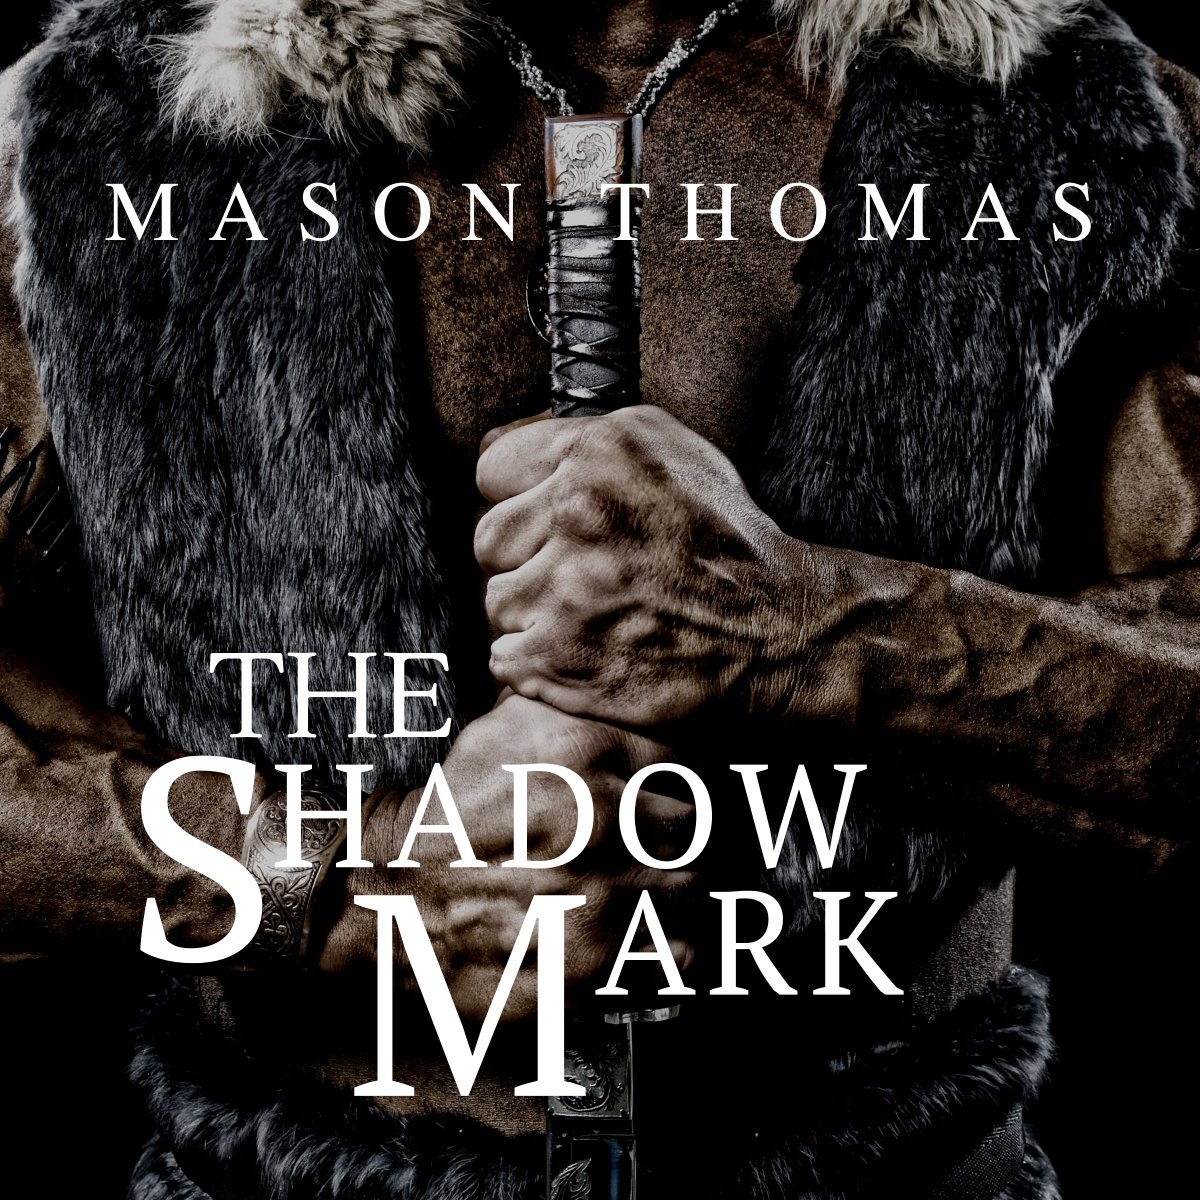 ✨MORE EXCITING NEWS TO SHARE!!✨
My audiobook for THE SHADOW MARK has been uploaded to AUDIBLE and is under review. In about 2 weeks it will be available to purchase!

Thanks to Marc Biagi for making the audiobook phenom & to all my kickstarter backers!!
#gayfantasy #gaybooks